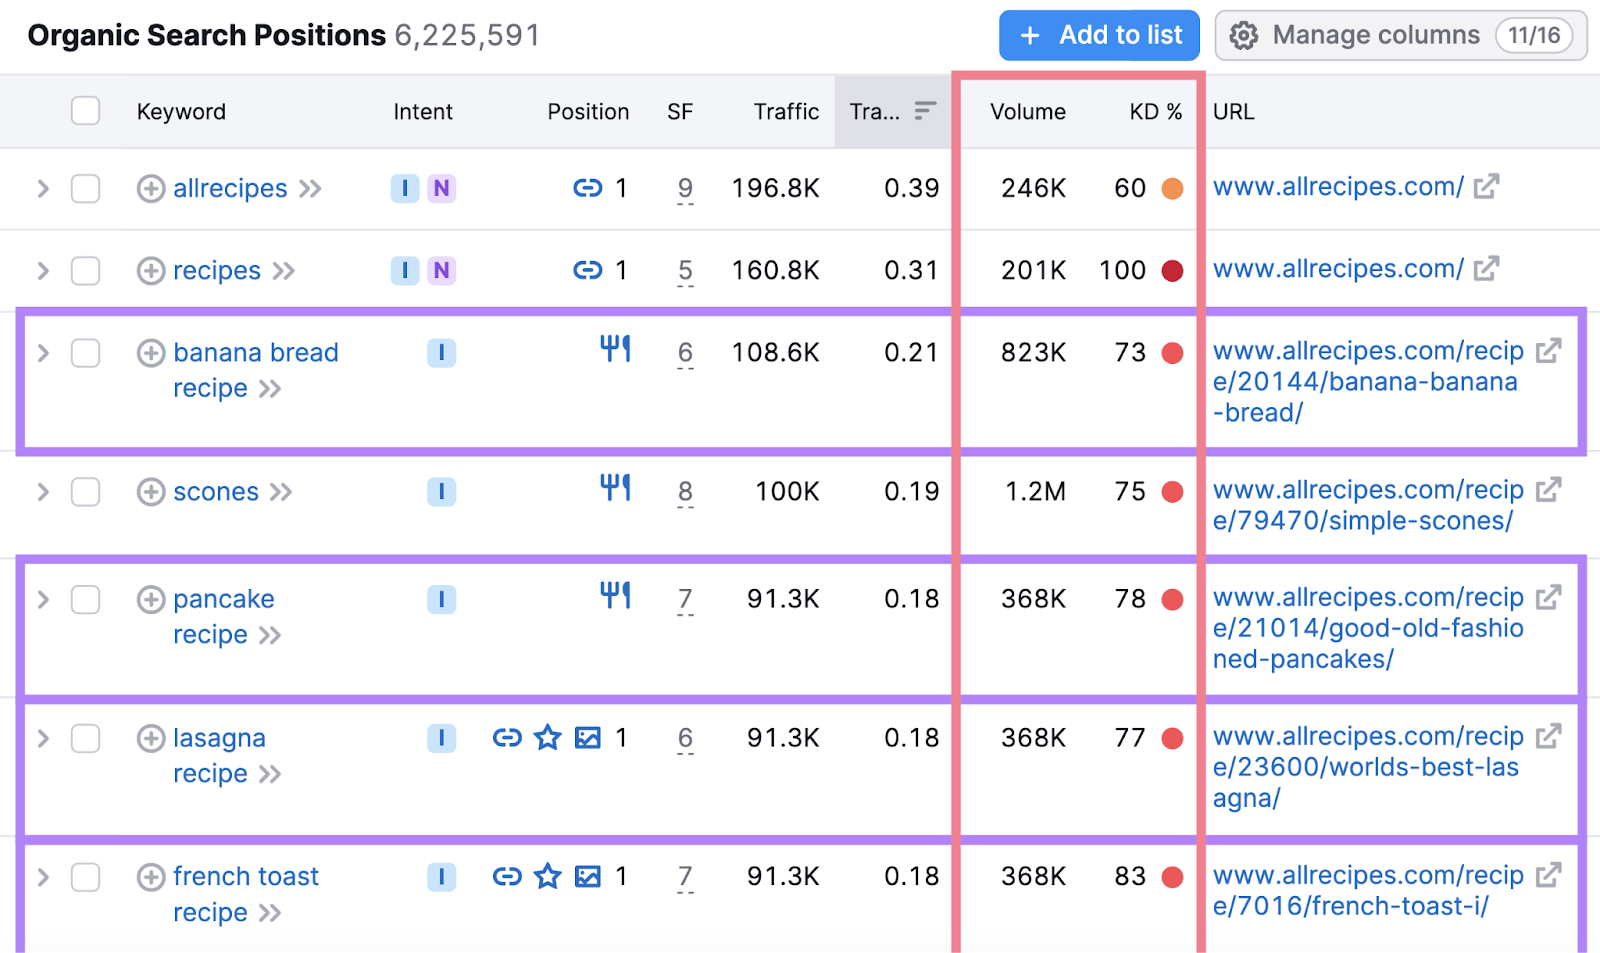 Organic Search Positions table shows the keywords your competitor is targeting and their metrics